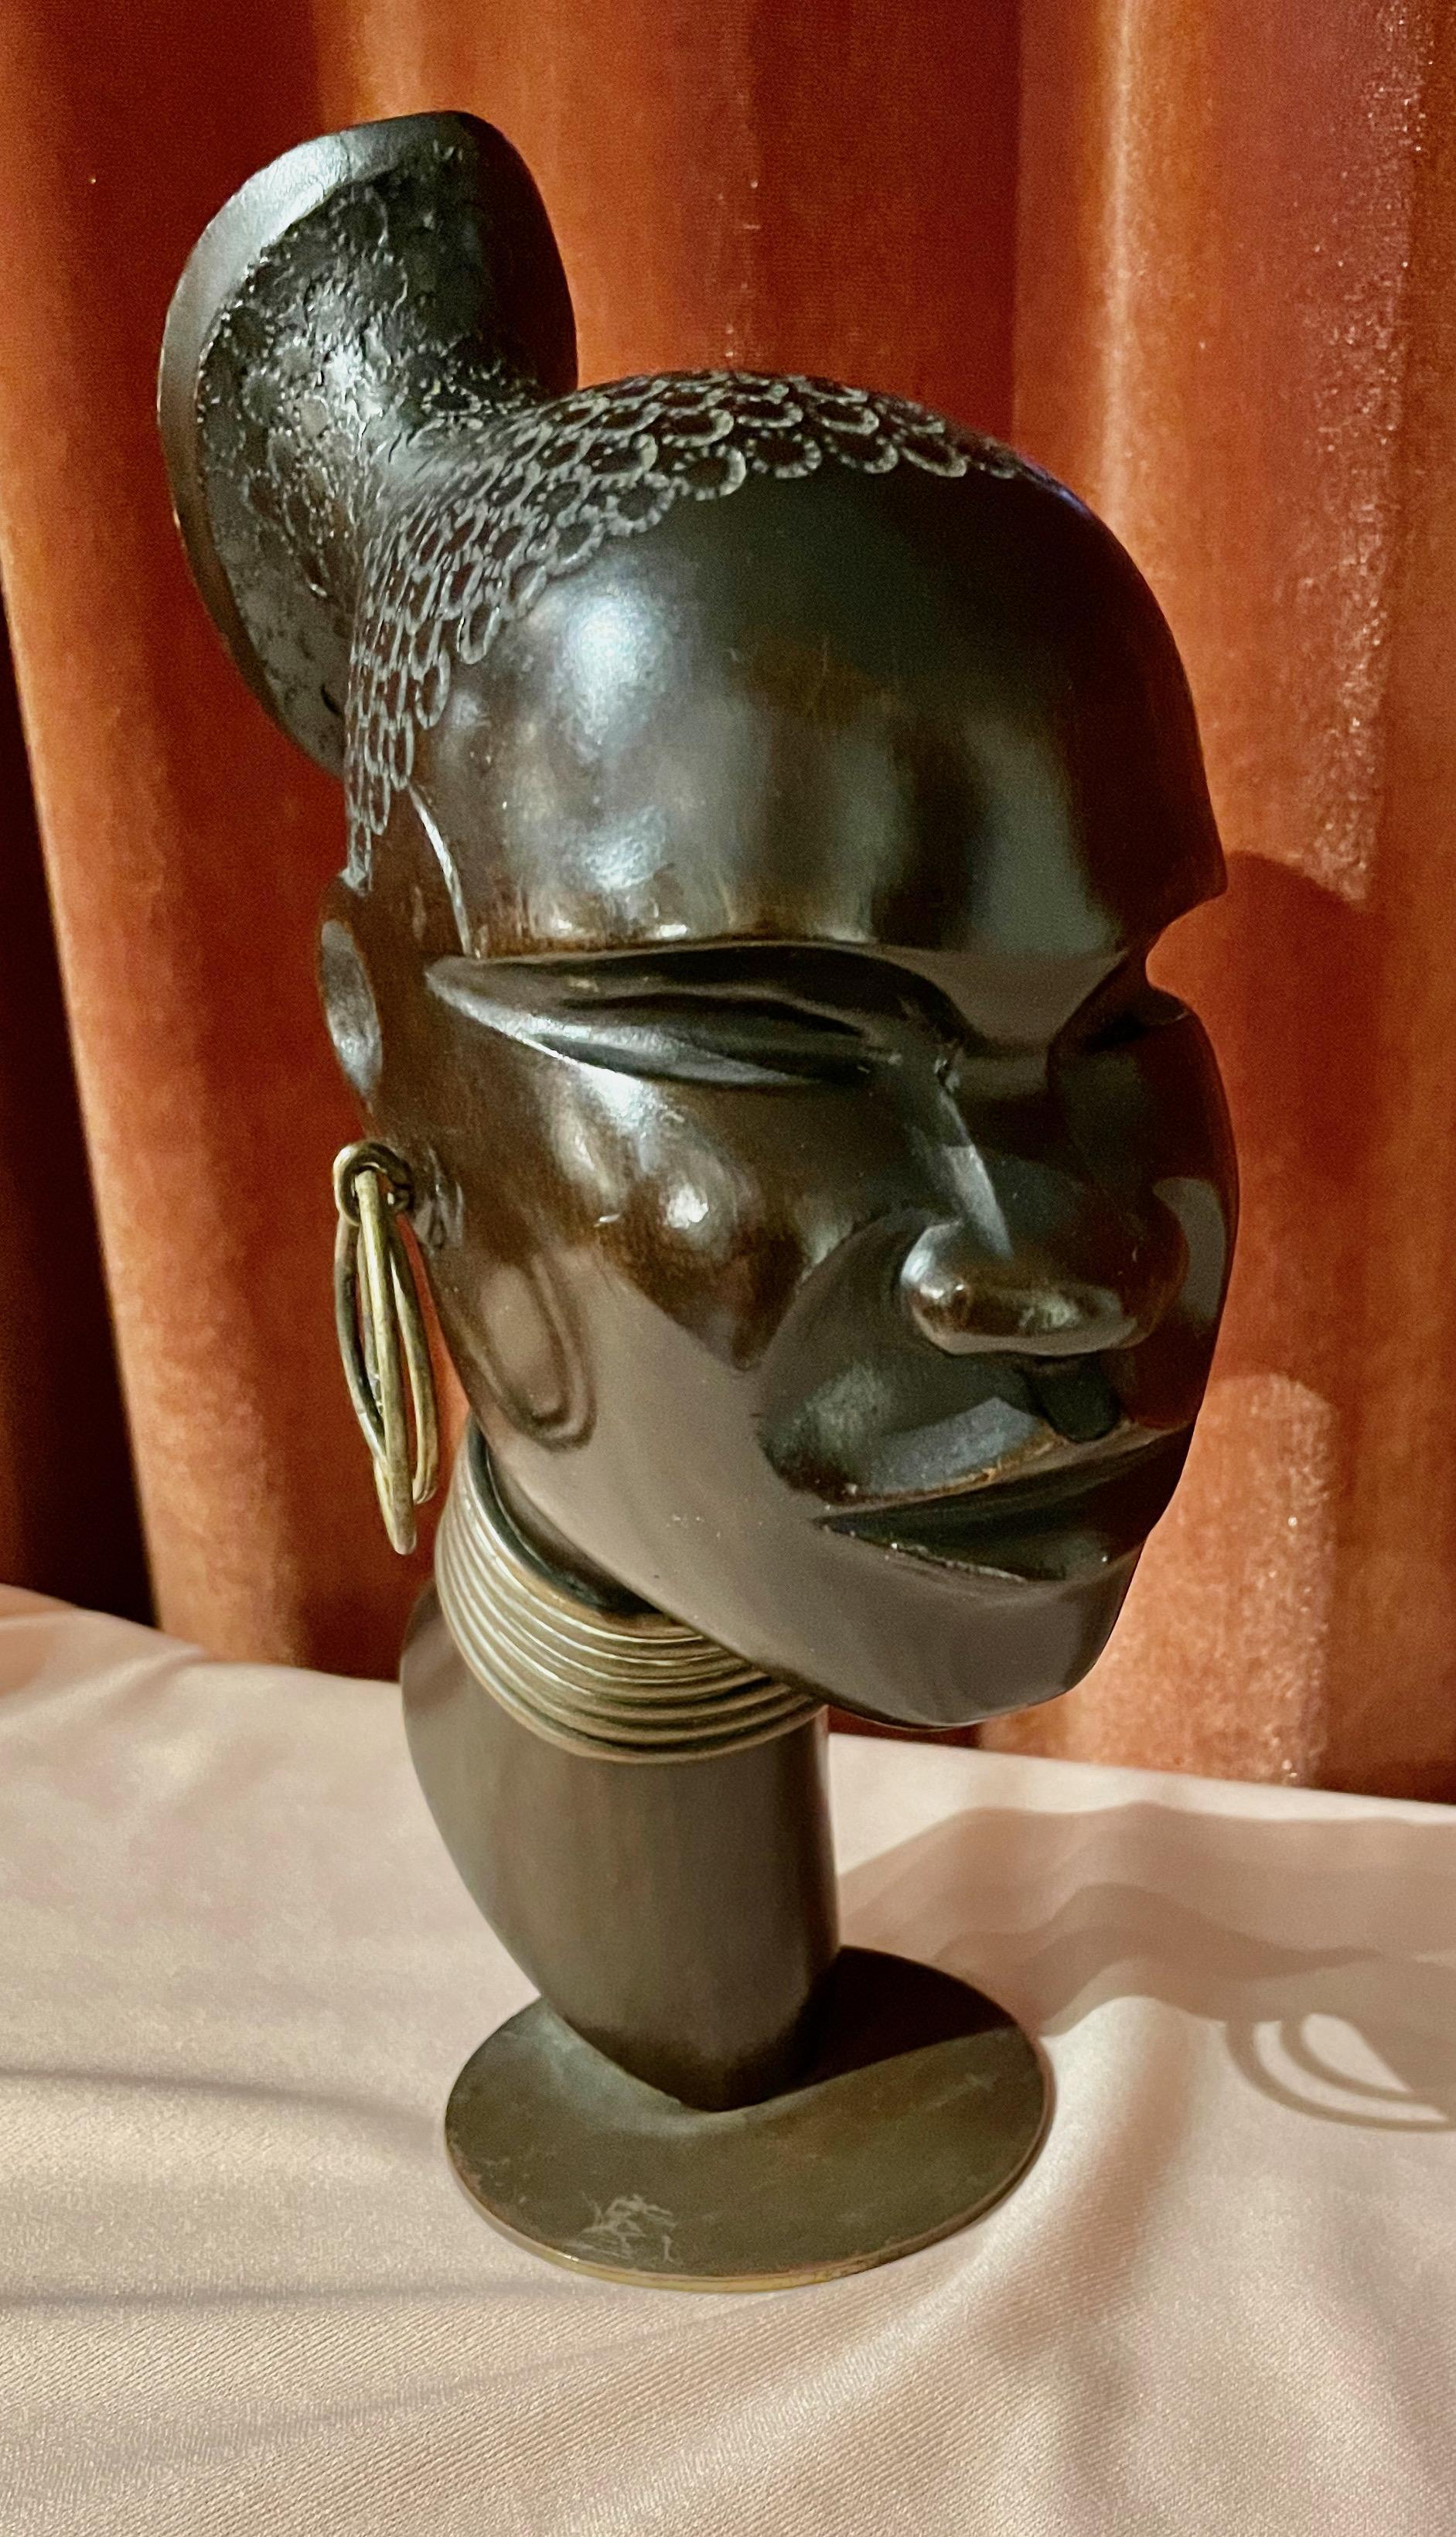 Hagenauer wood sculpture Head of African Woman. This beautiful sculpture was designed and manufactured by Hagenauer in Vienna in the 1930s during the Art Deco era. It shows the head of an African warrior and is made of finely carved wood, with some